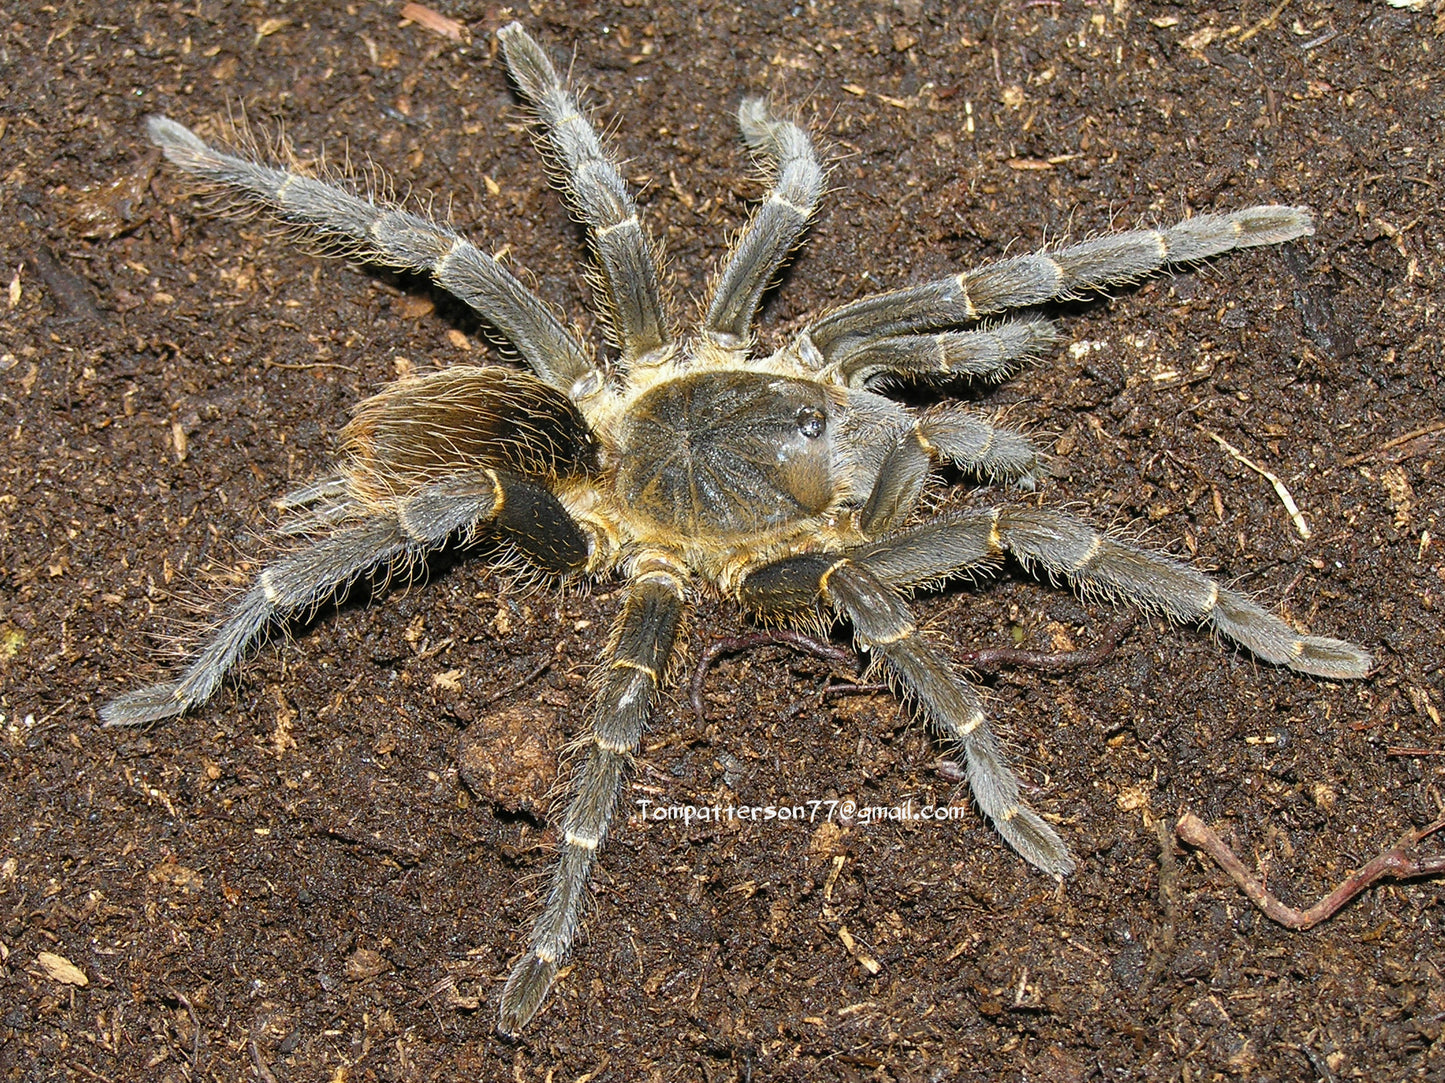 Acanthoscurria theraphosides